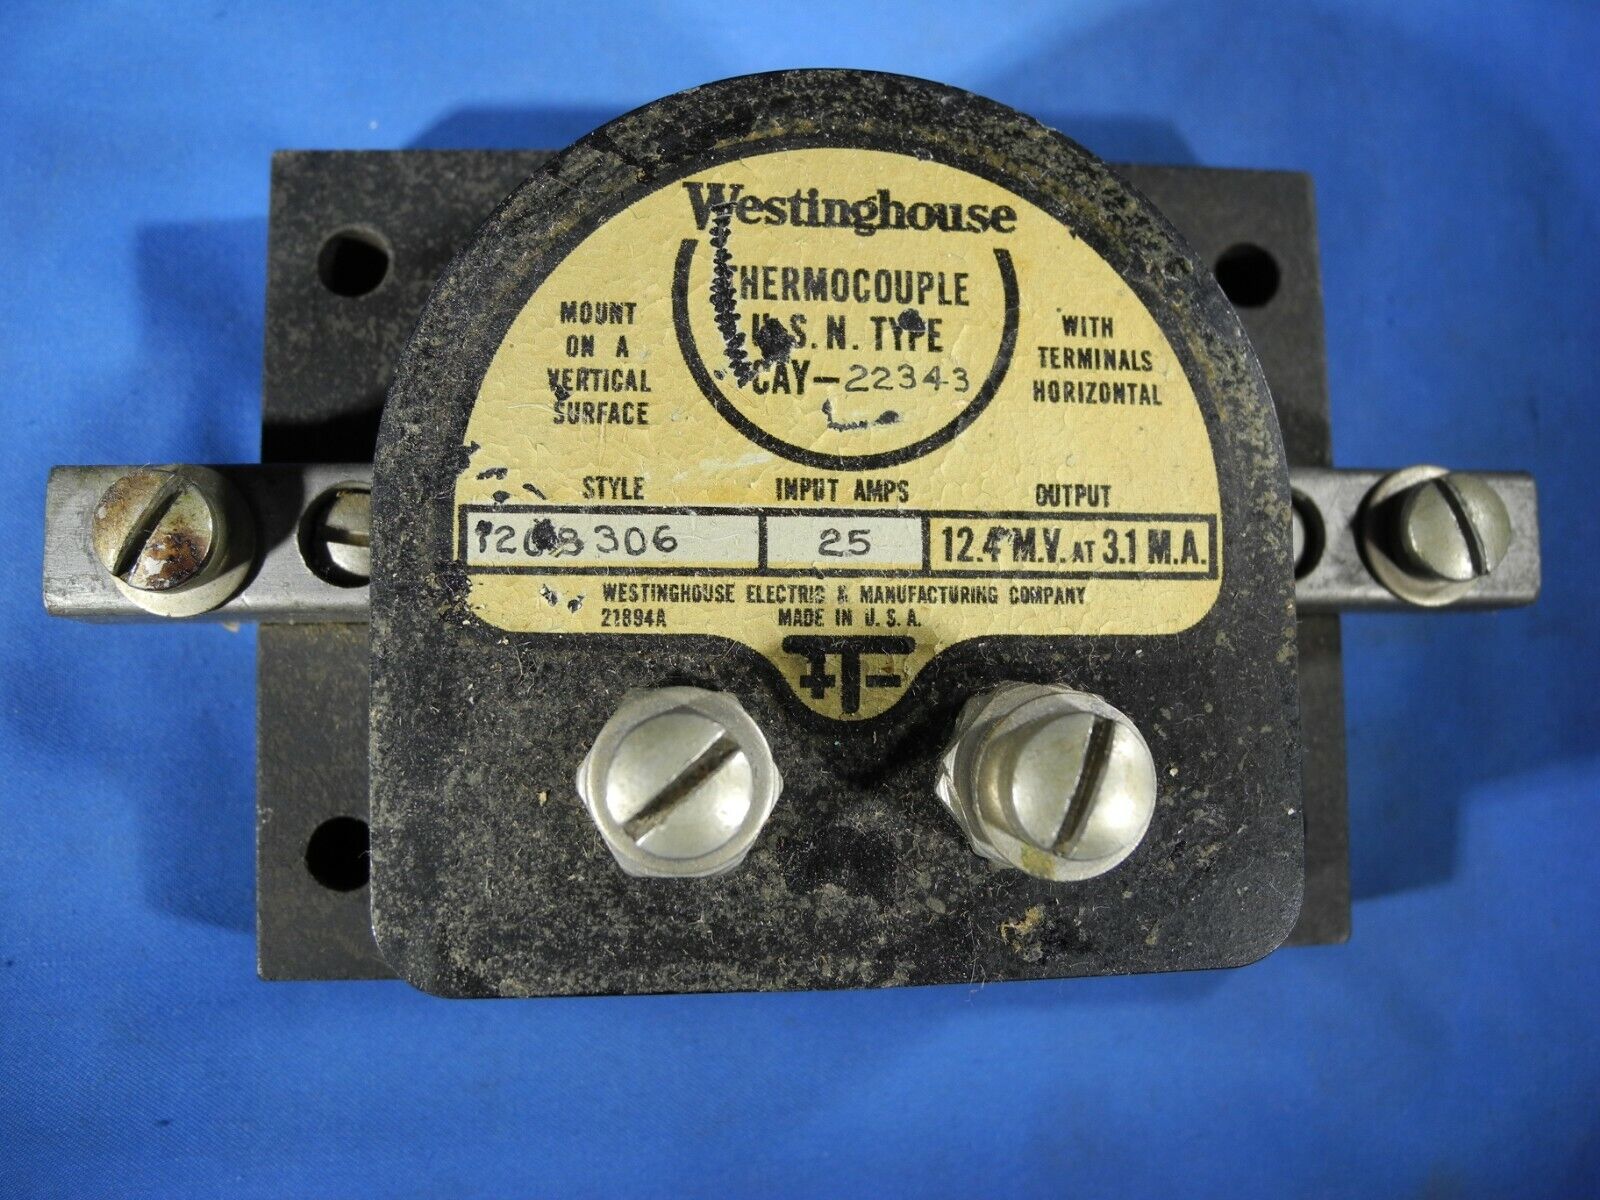 USN Type Westinghouse Thermocouple CAY-22343, 25 amp 12.4 M.V. 3.1 M.A. 1208303